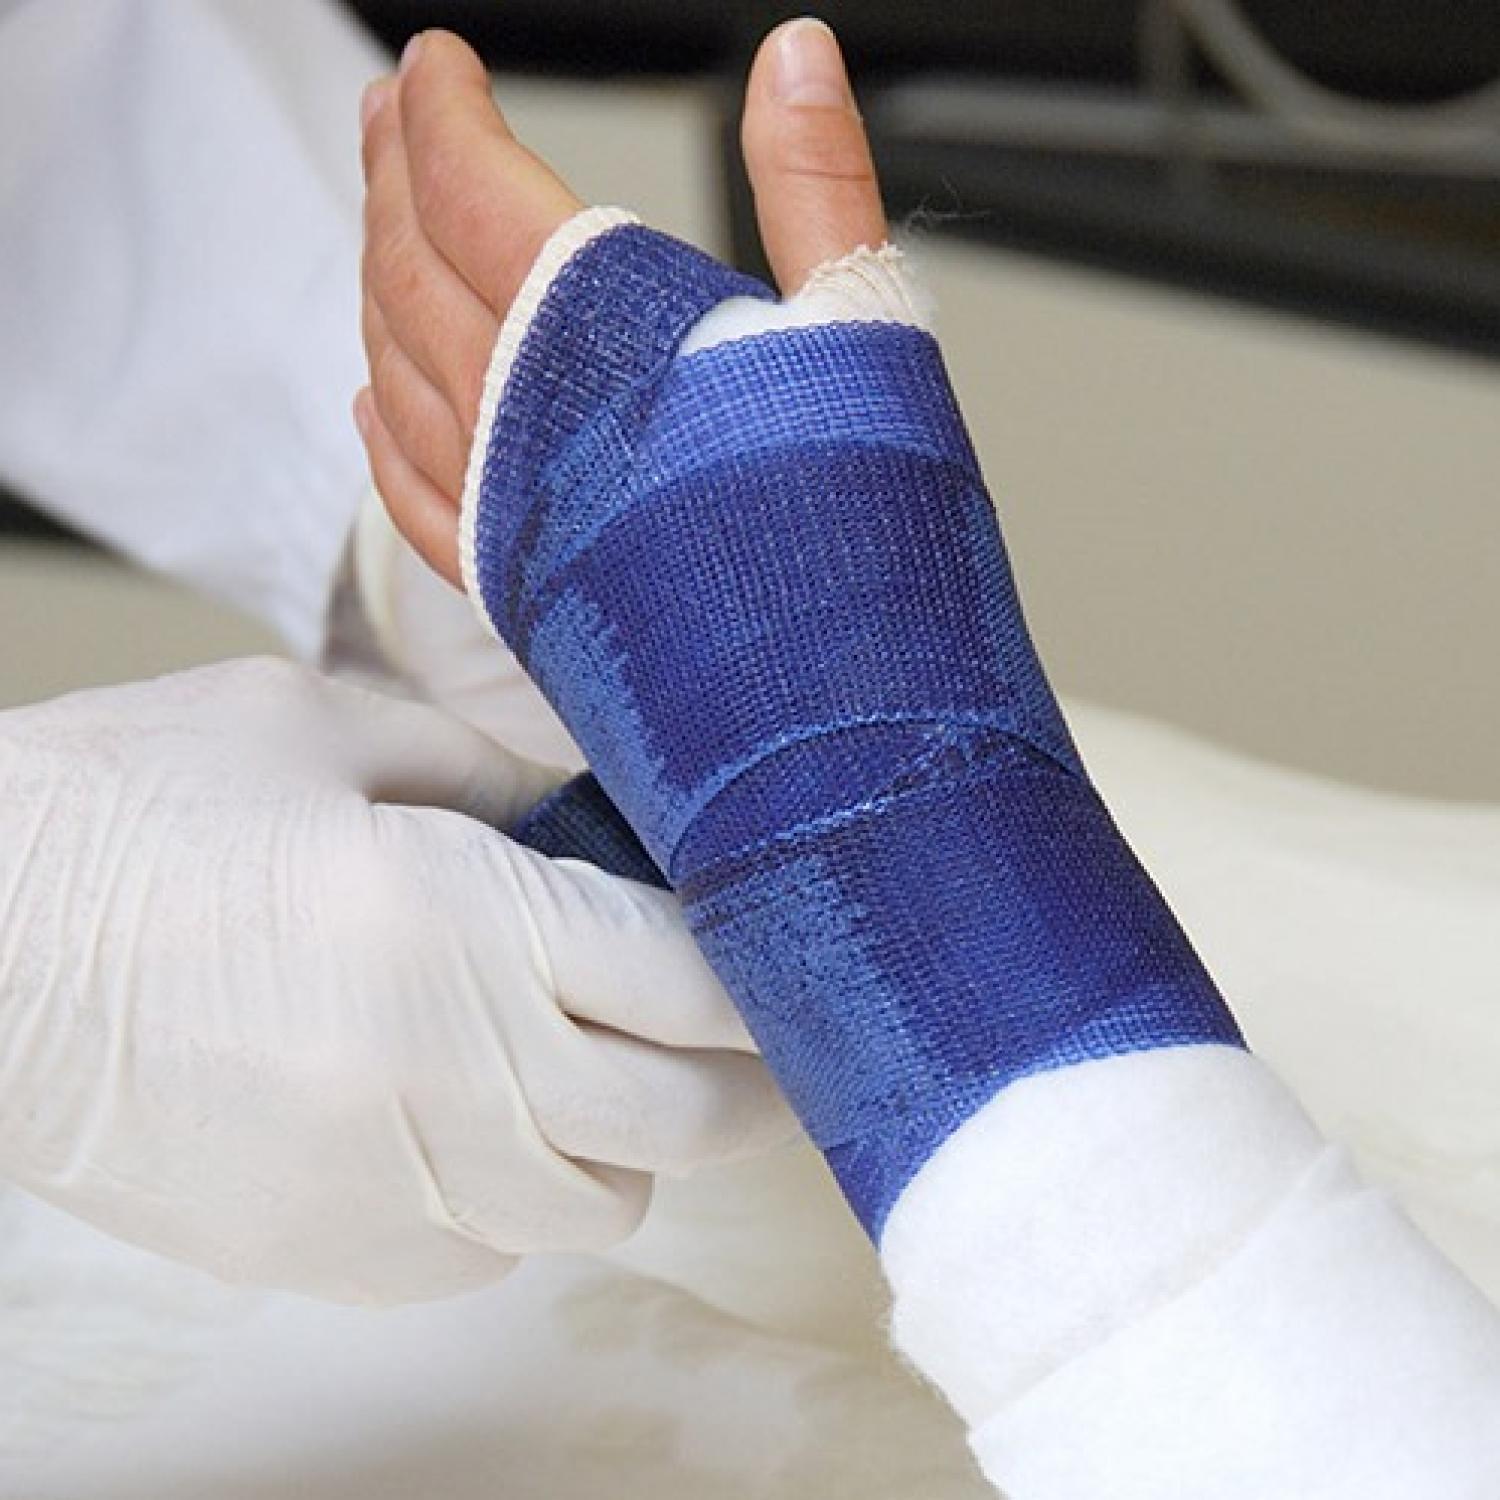 A person having a cast put on their arm